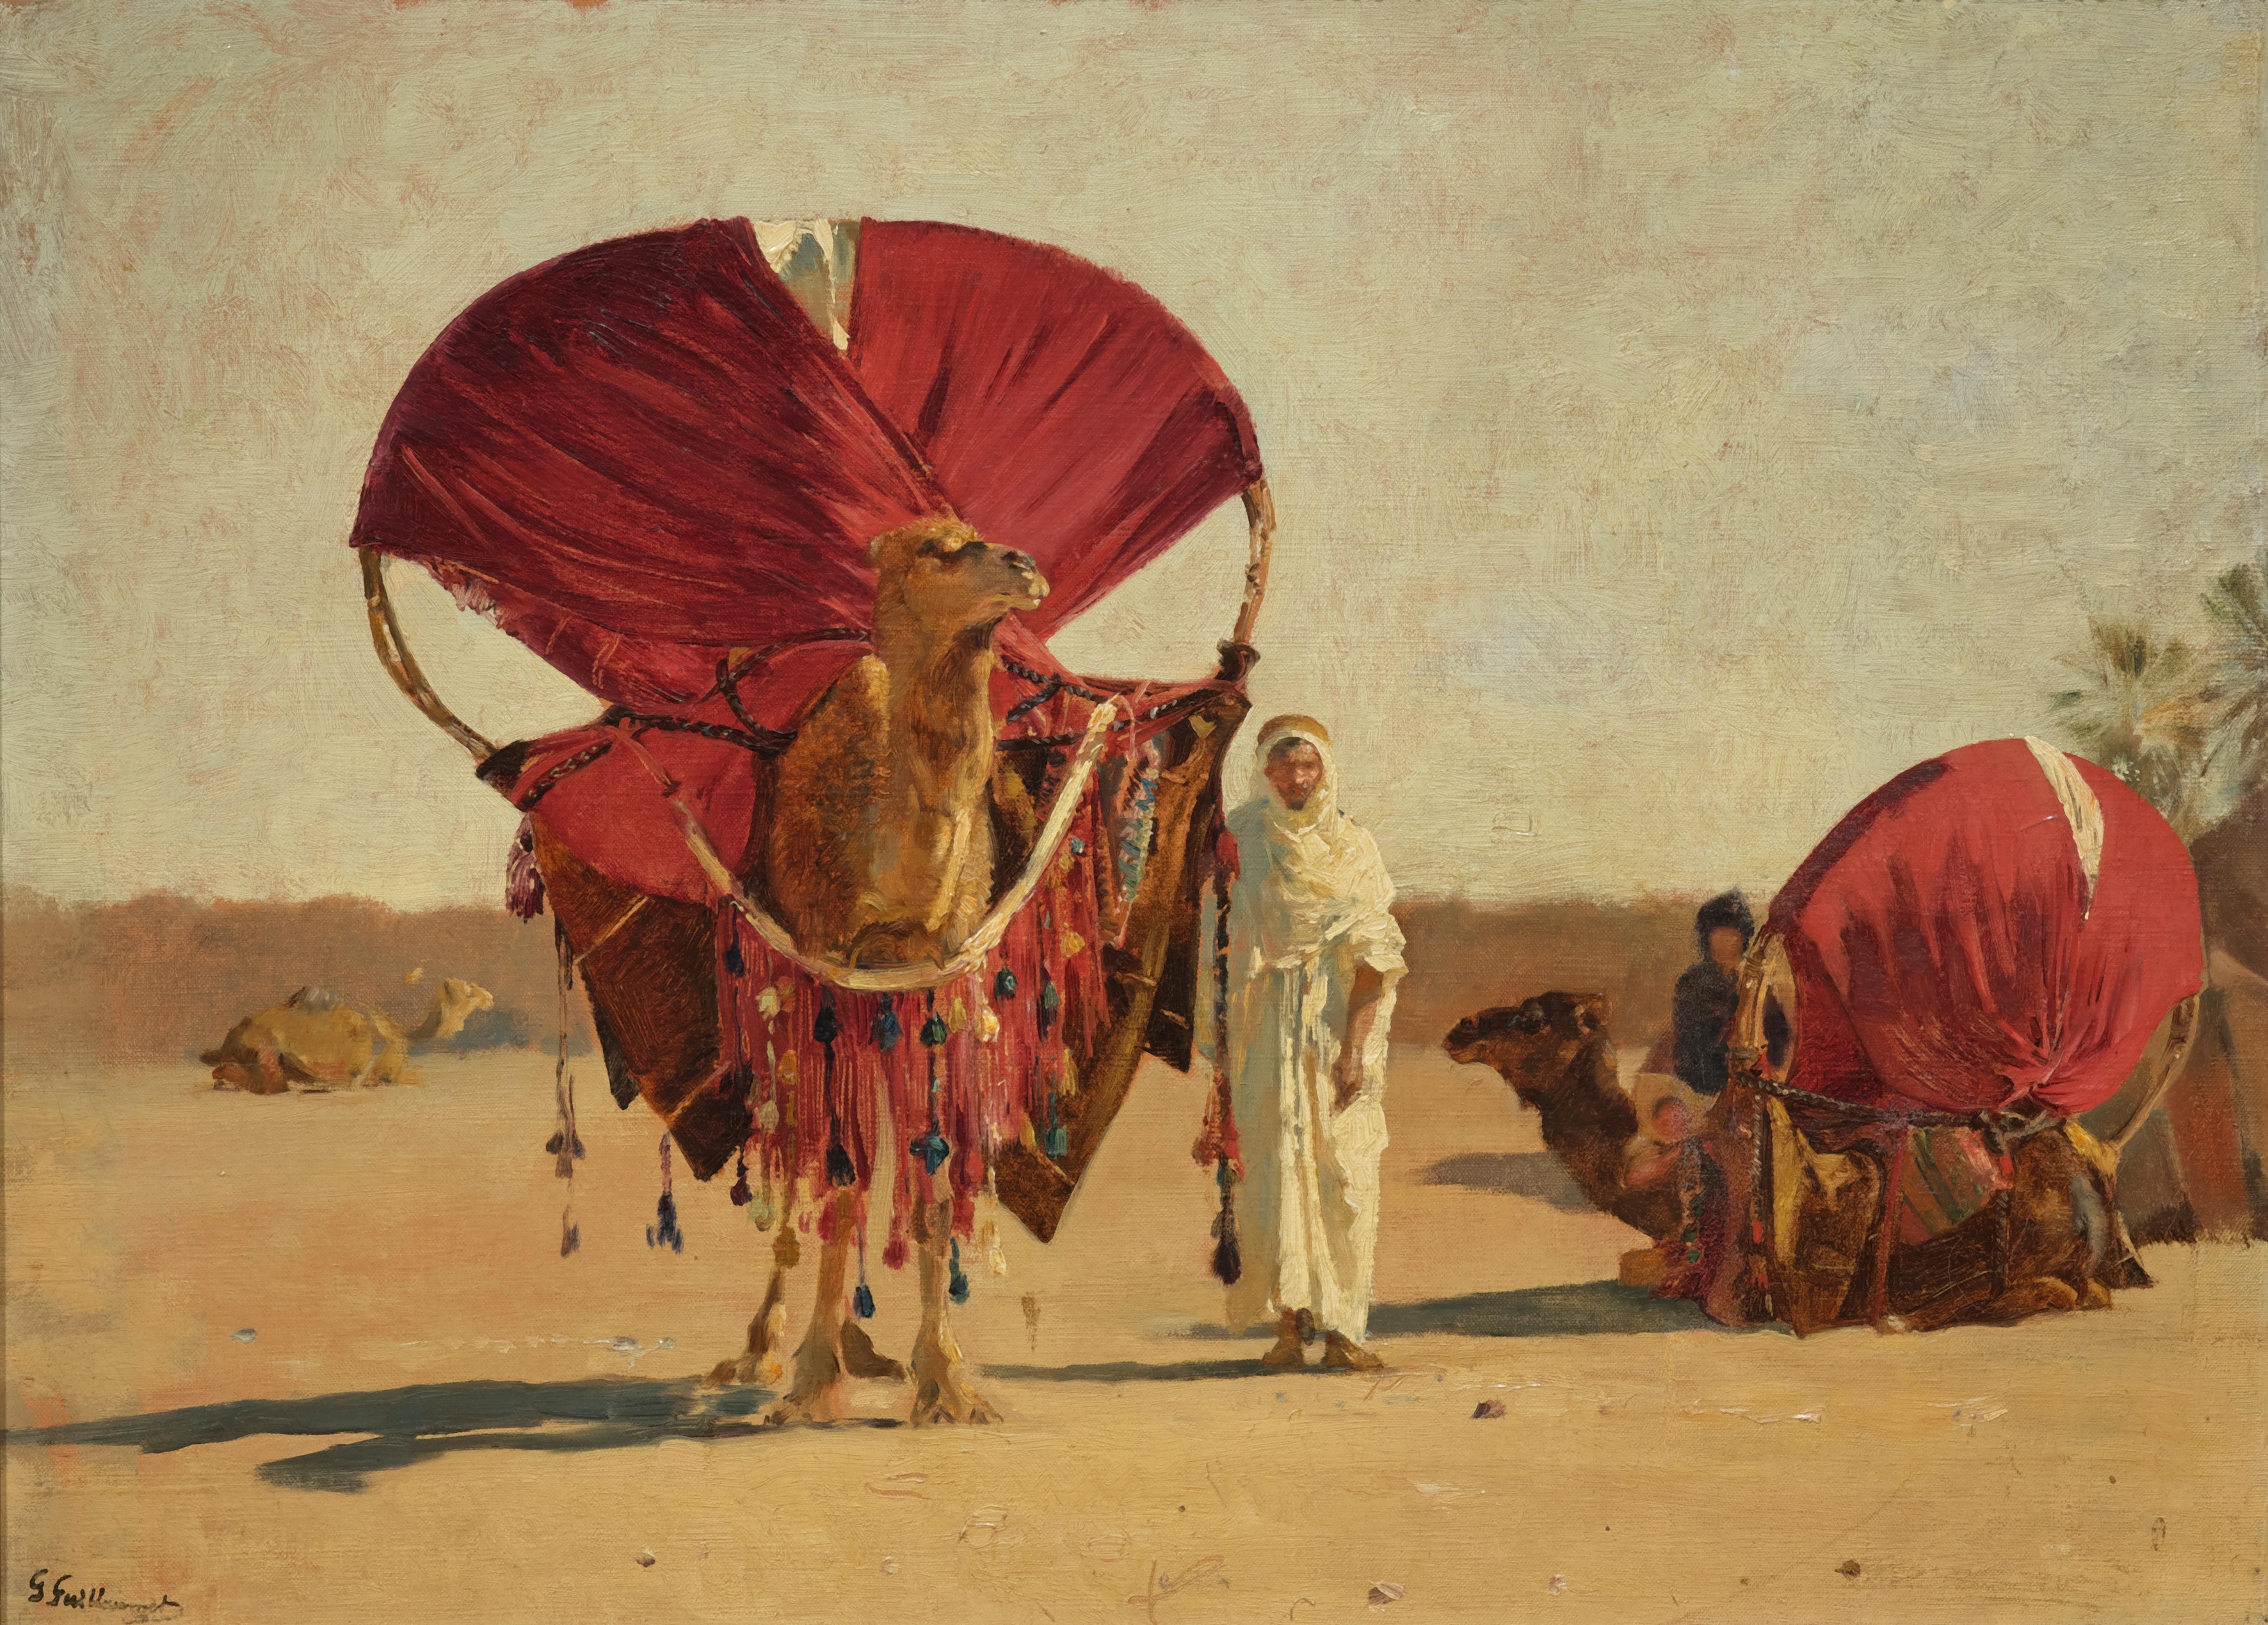 Caravan in the Desert, a painting by Gustave Guillaumet (1840 - 1887) 6